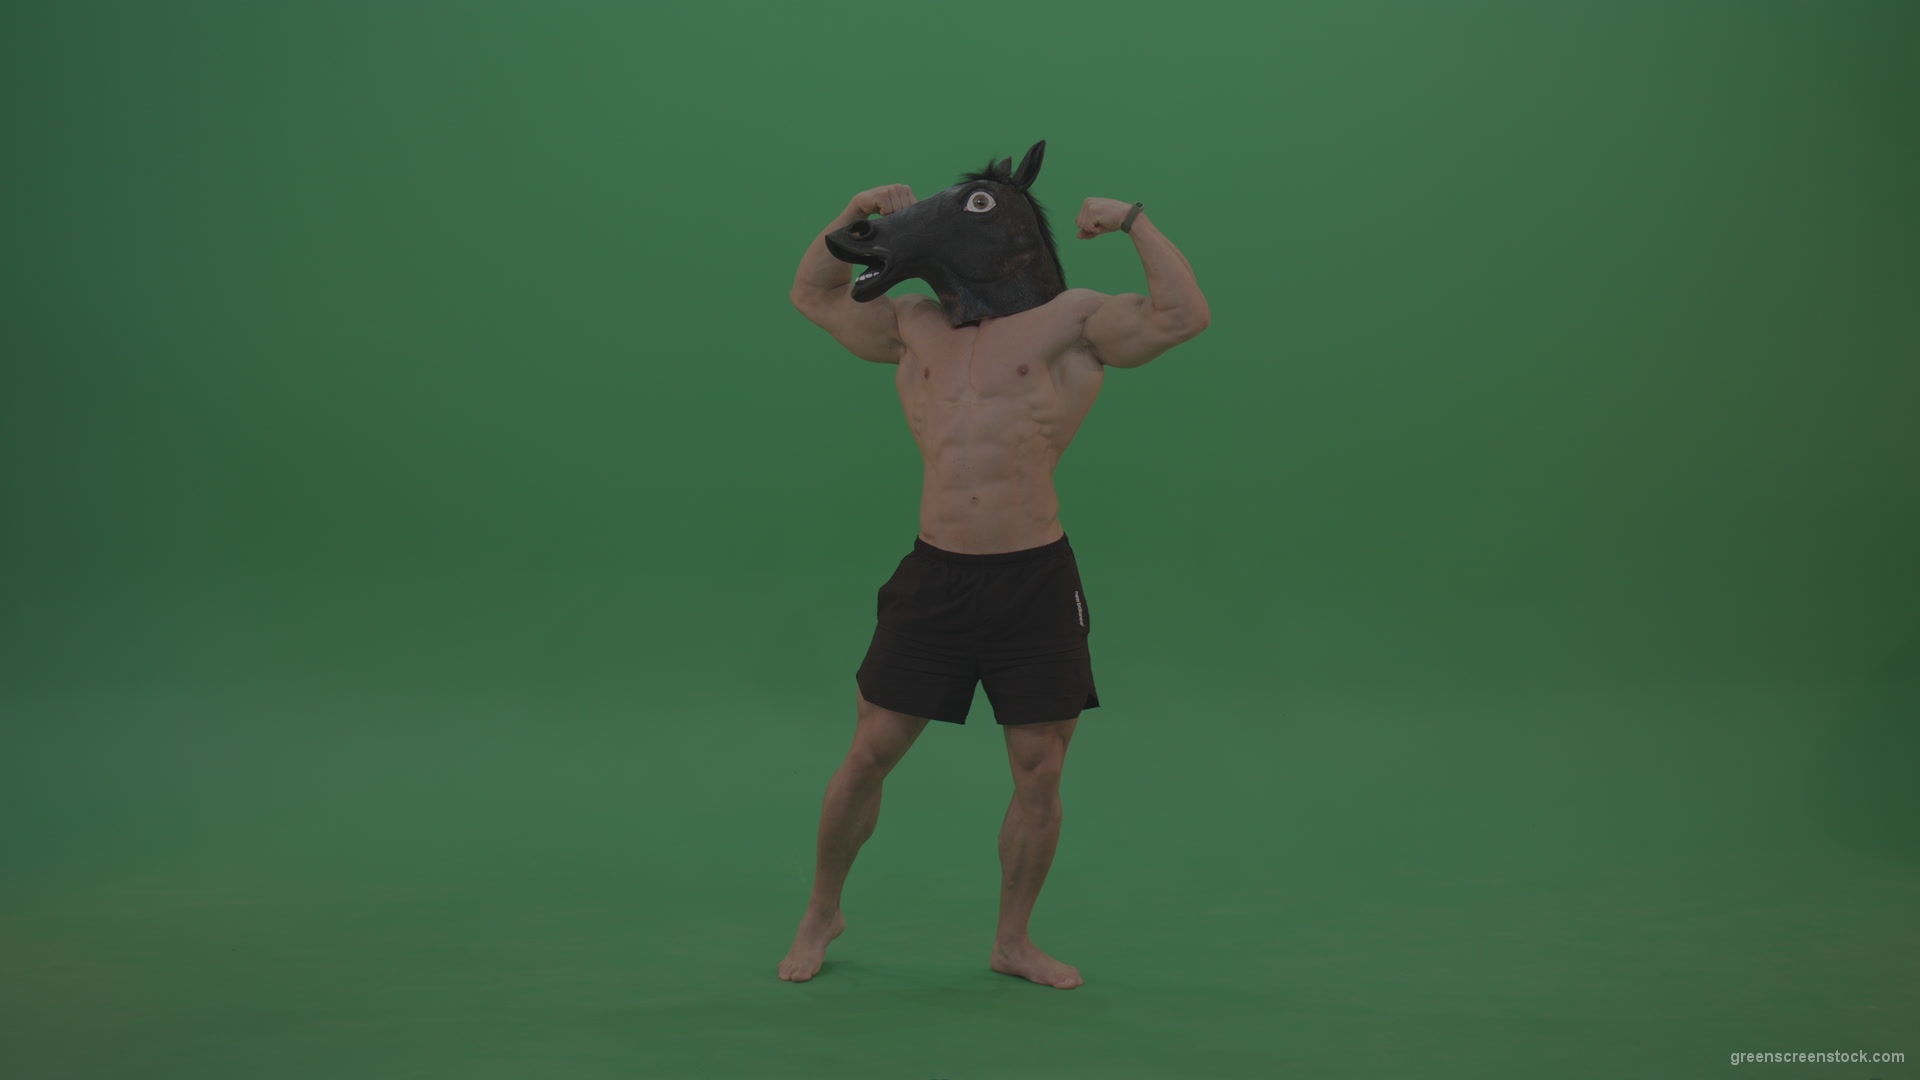 Ripped-man-with-horse-head-displays-body-over-chromakey-background_009 Green Screen Stock